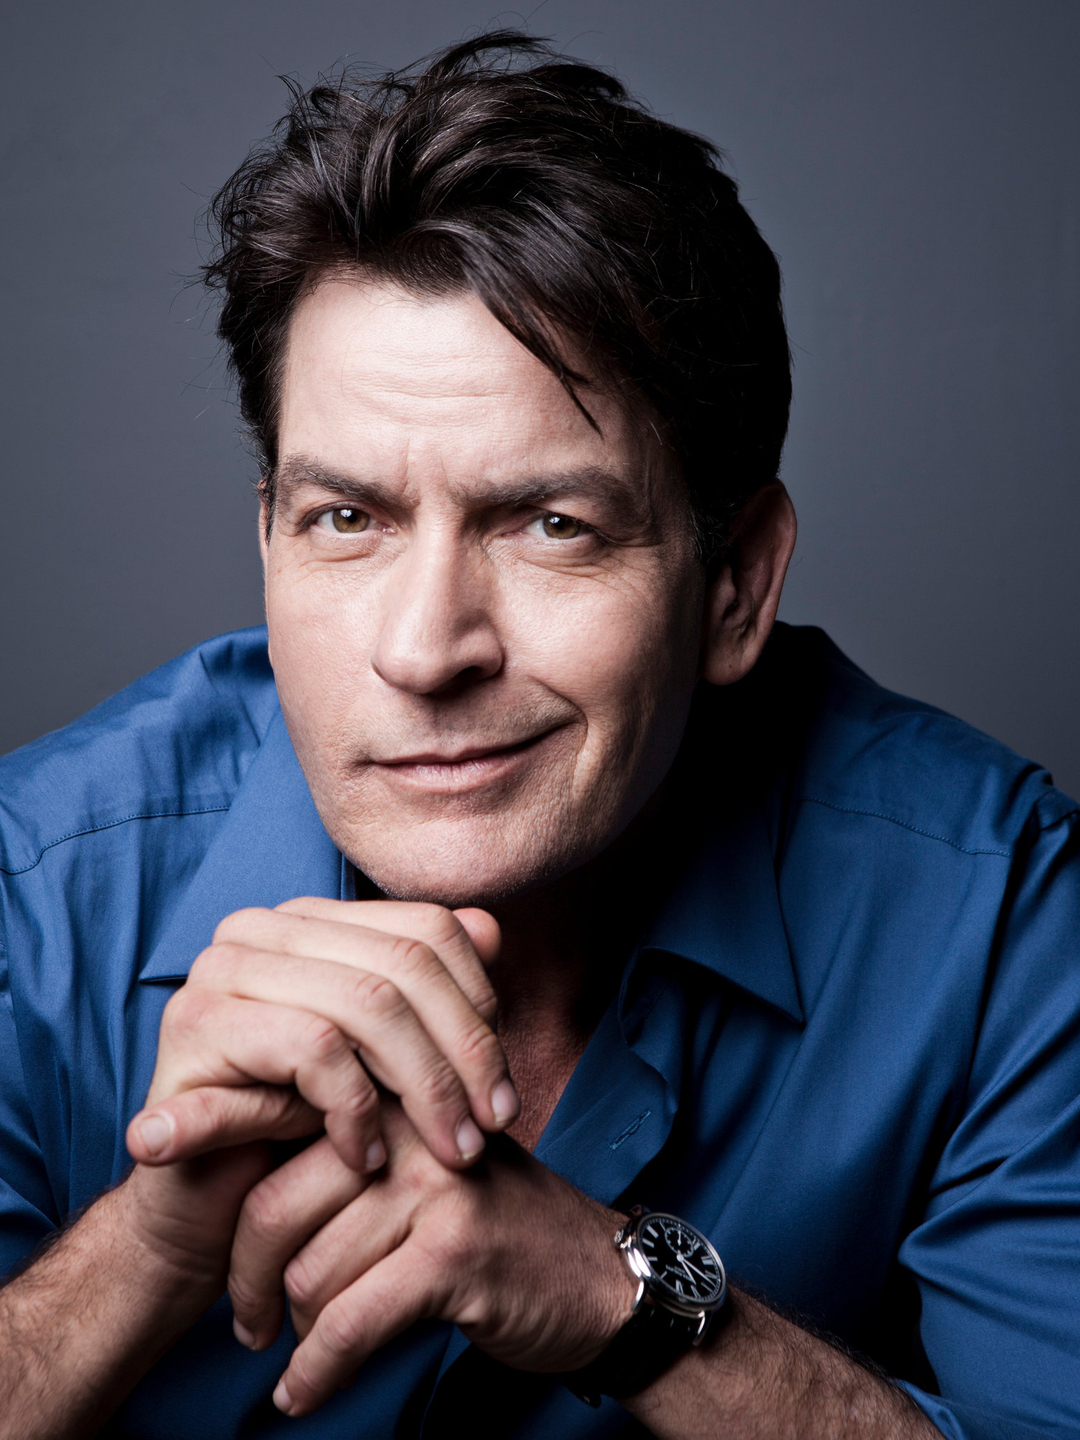 Charlie Sheen early childhood